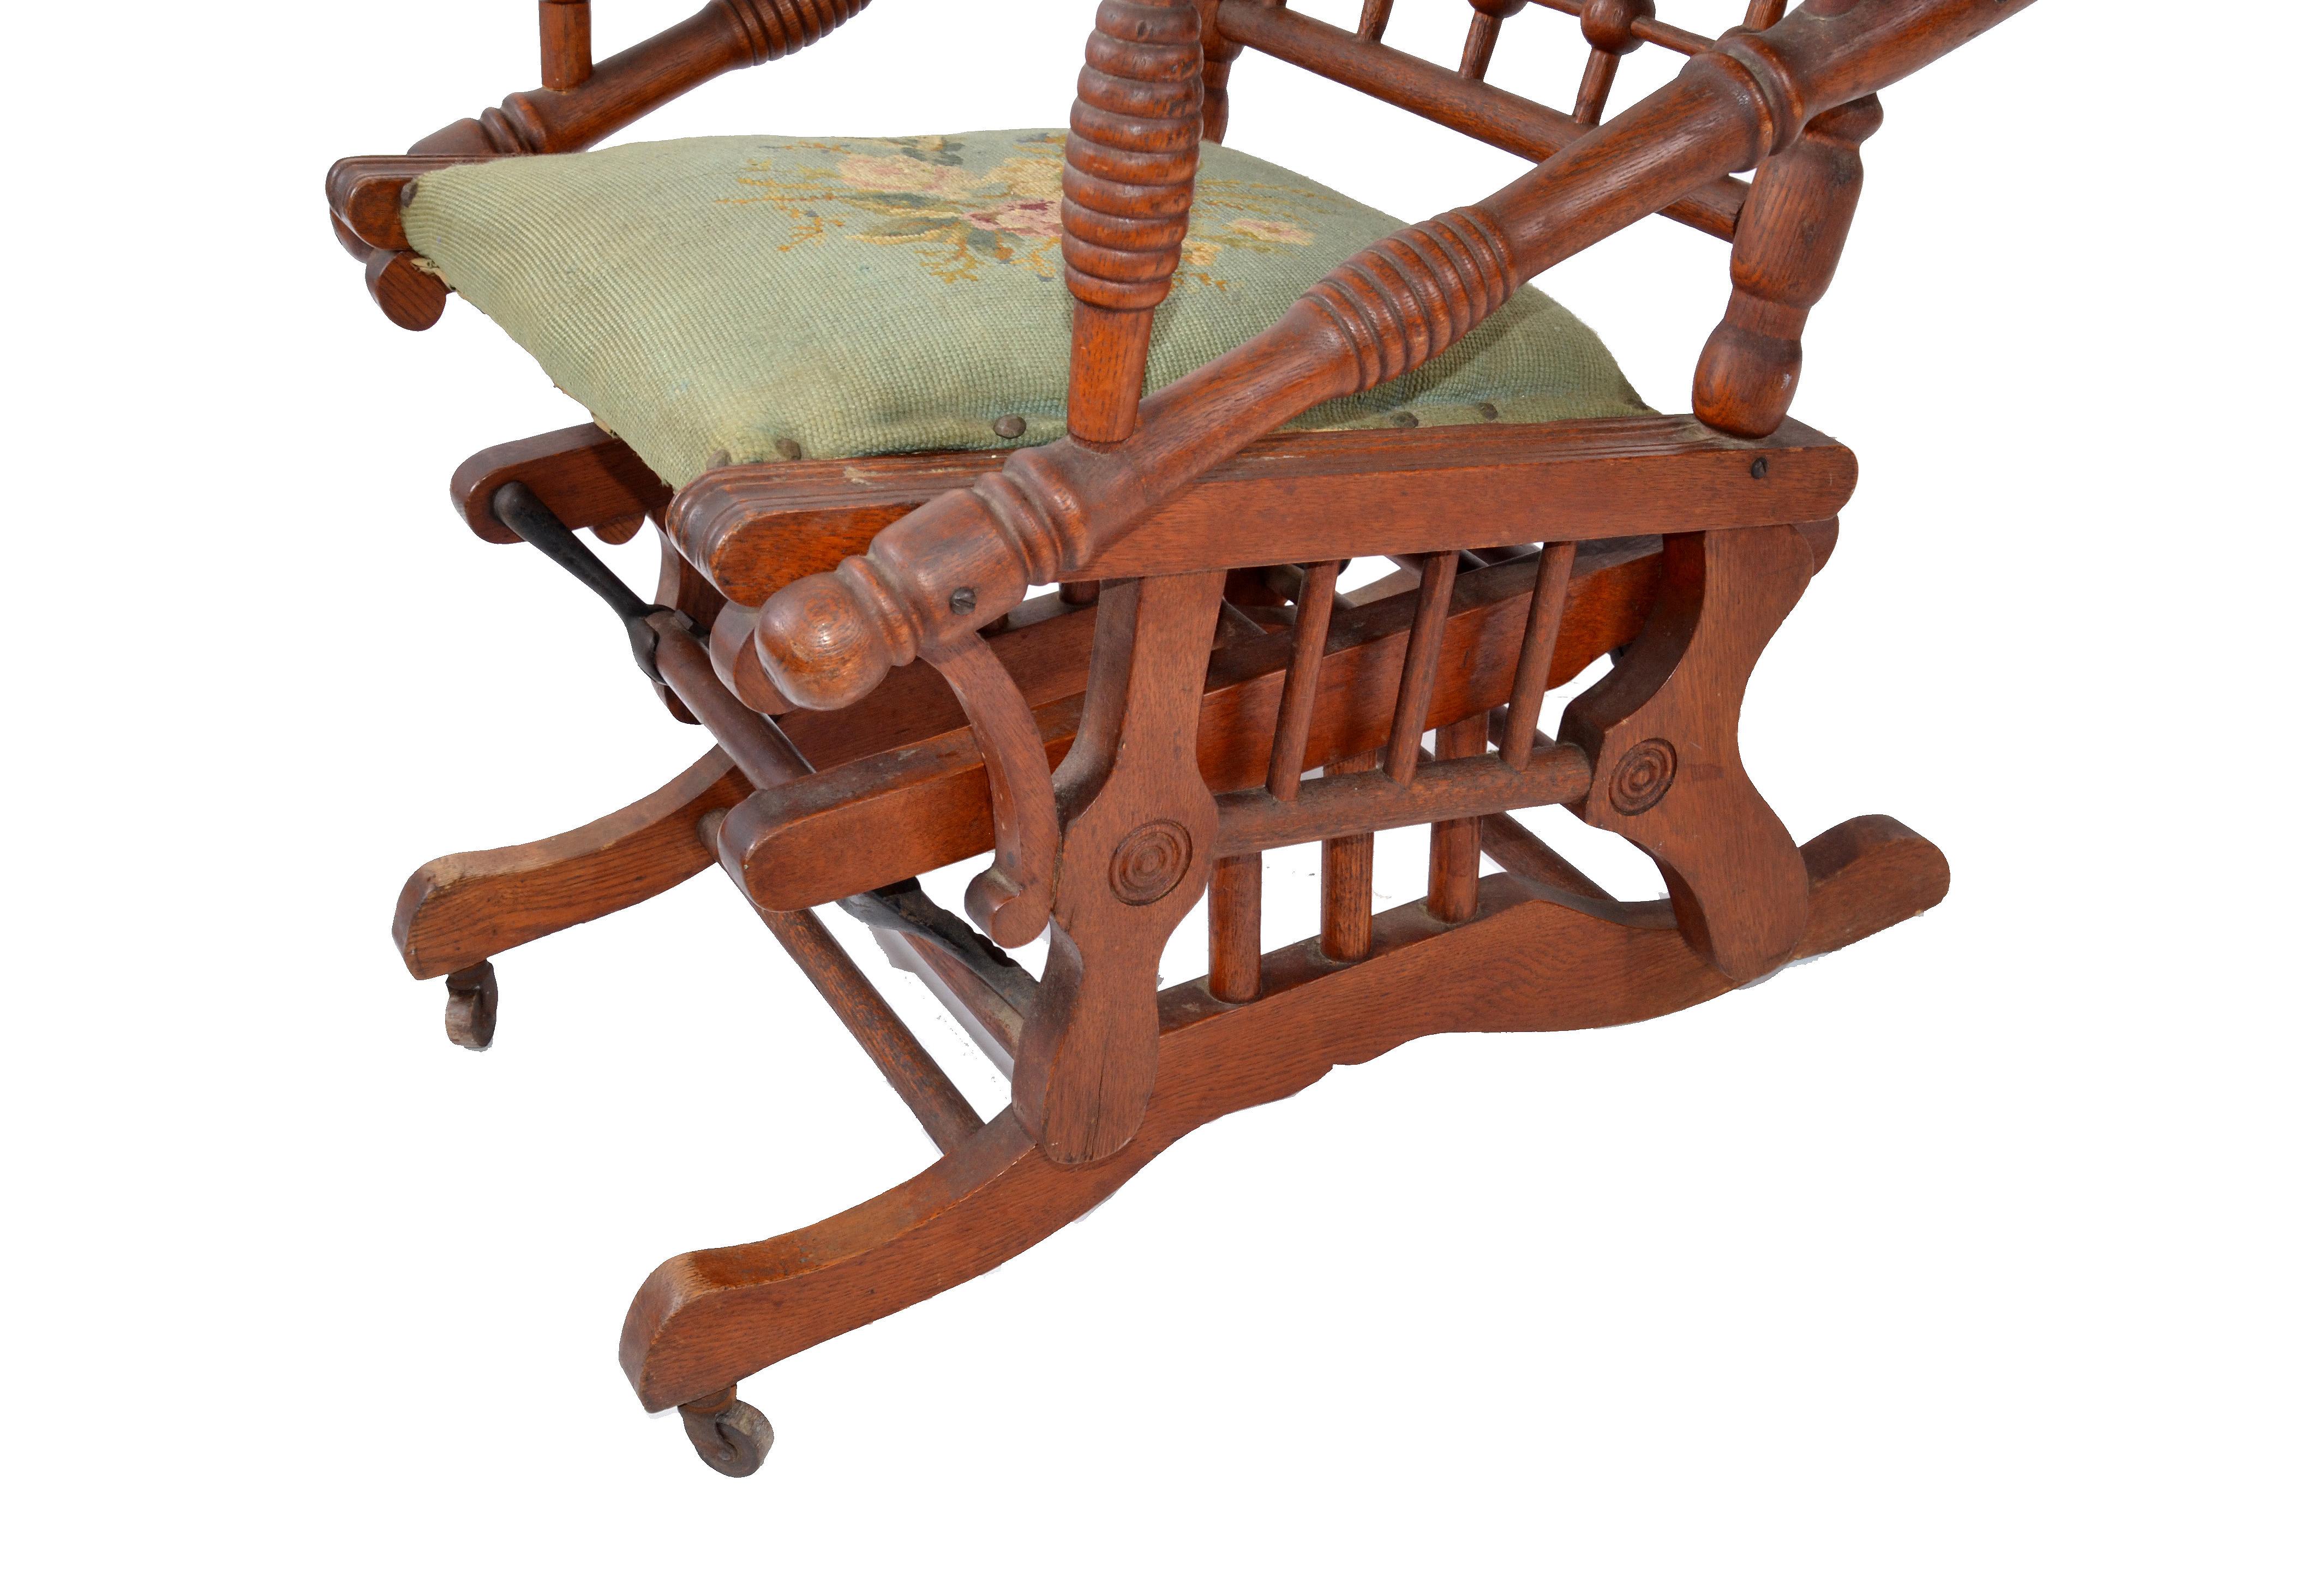 19th Century Antique Rocking Chair Hand Carved and Turned Walnut Wood Needlepoint Upholstery For Sale